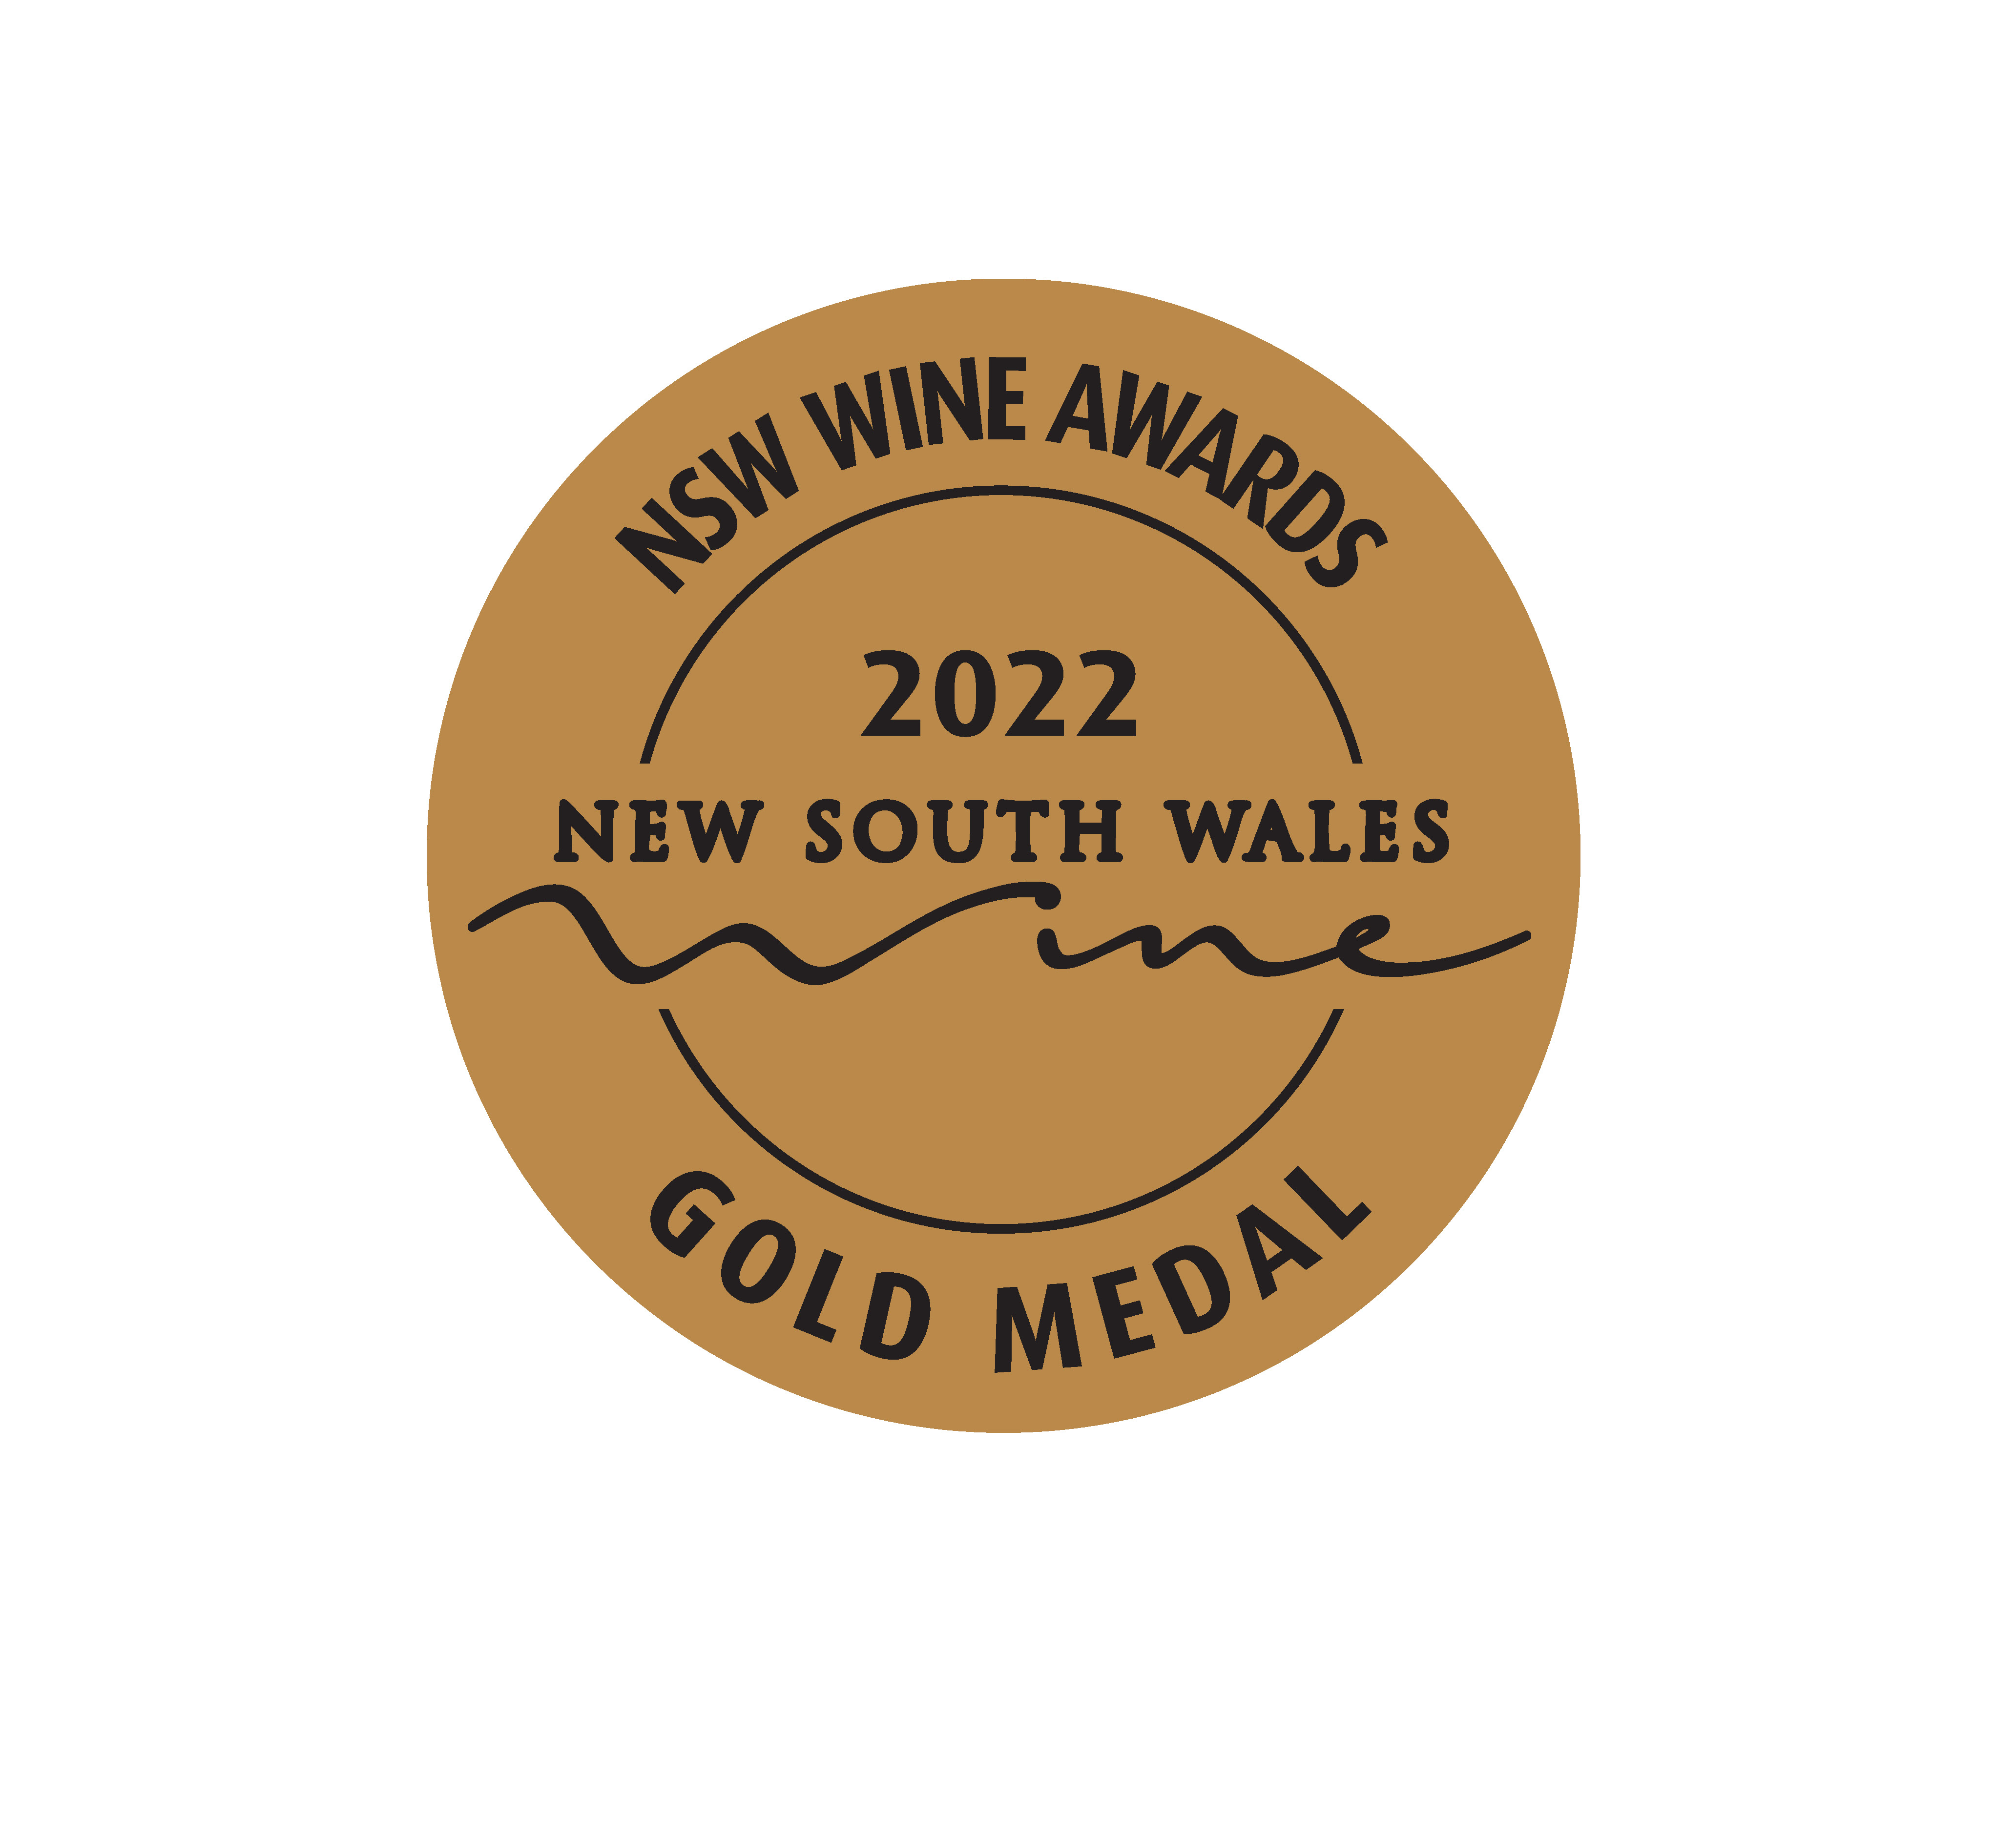 NSW Wine Awards Gold Medal